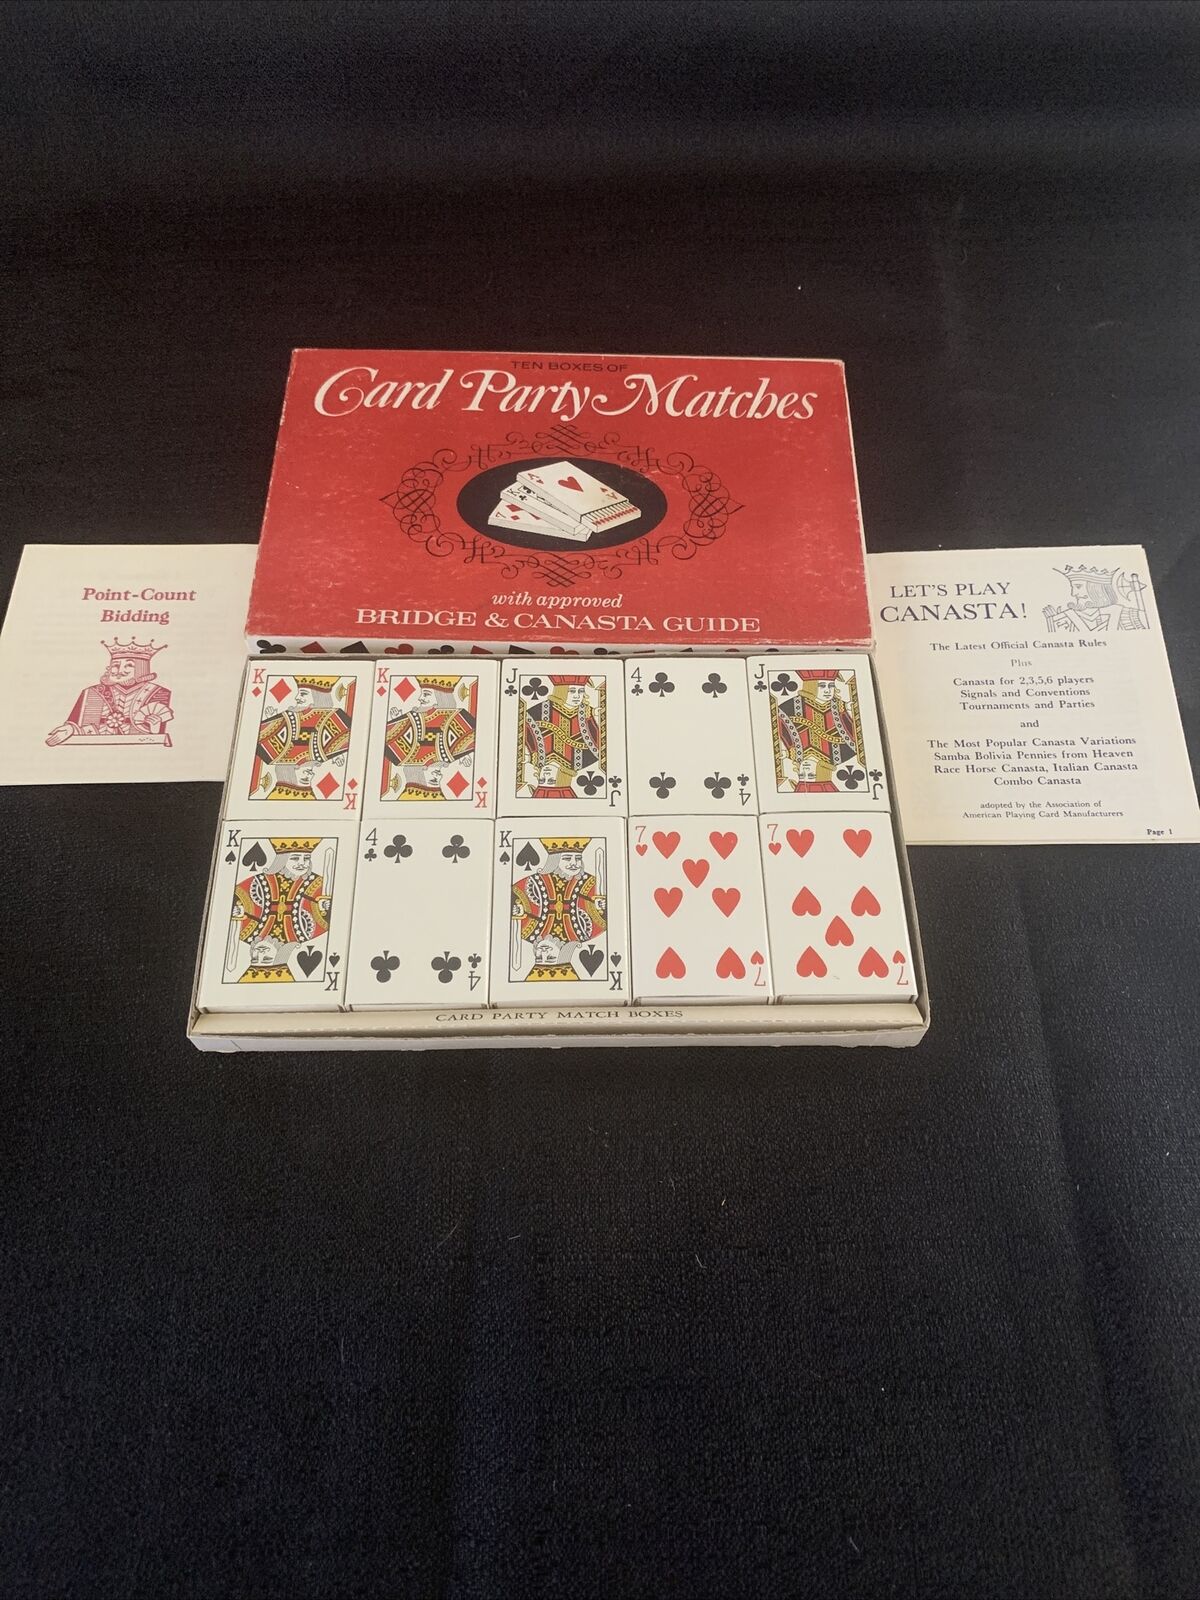 1963 VTG Card Party Matches With Bridge & Canasta Guides Made In The USA NY,NY